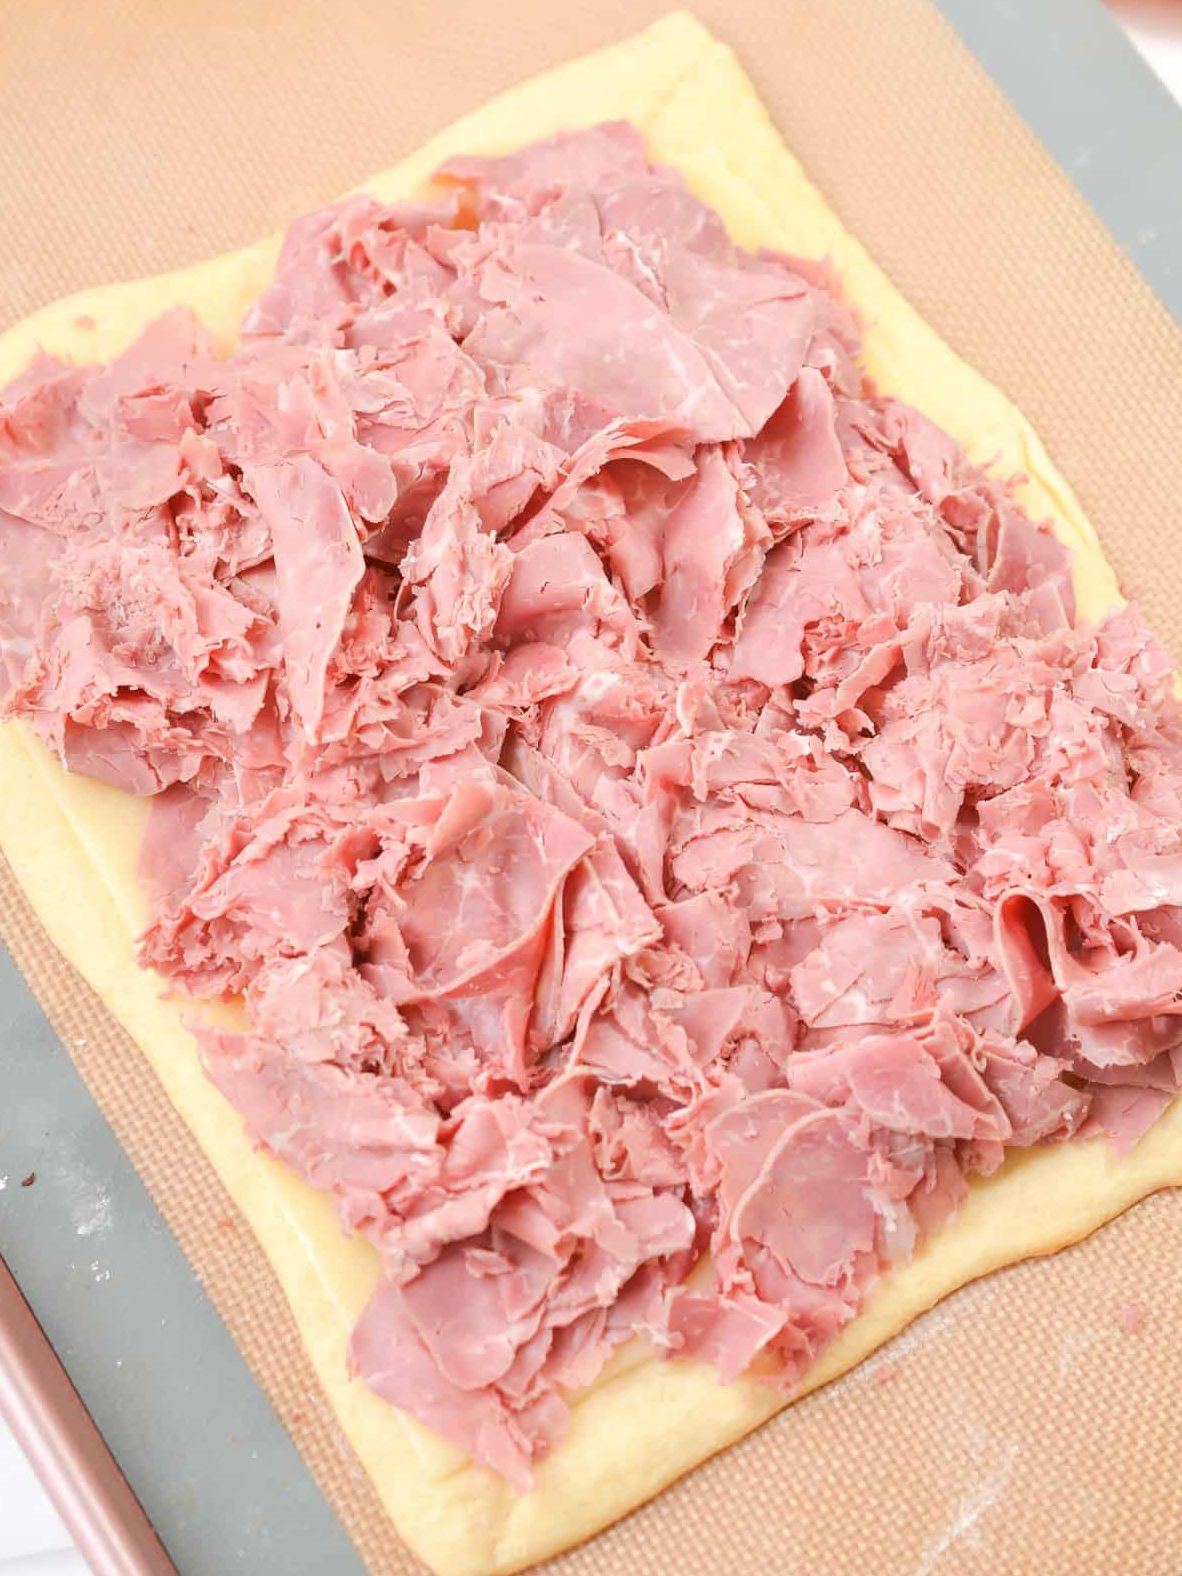 Place the corned beef on top of the swiss cheese.